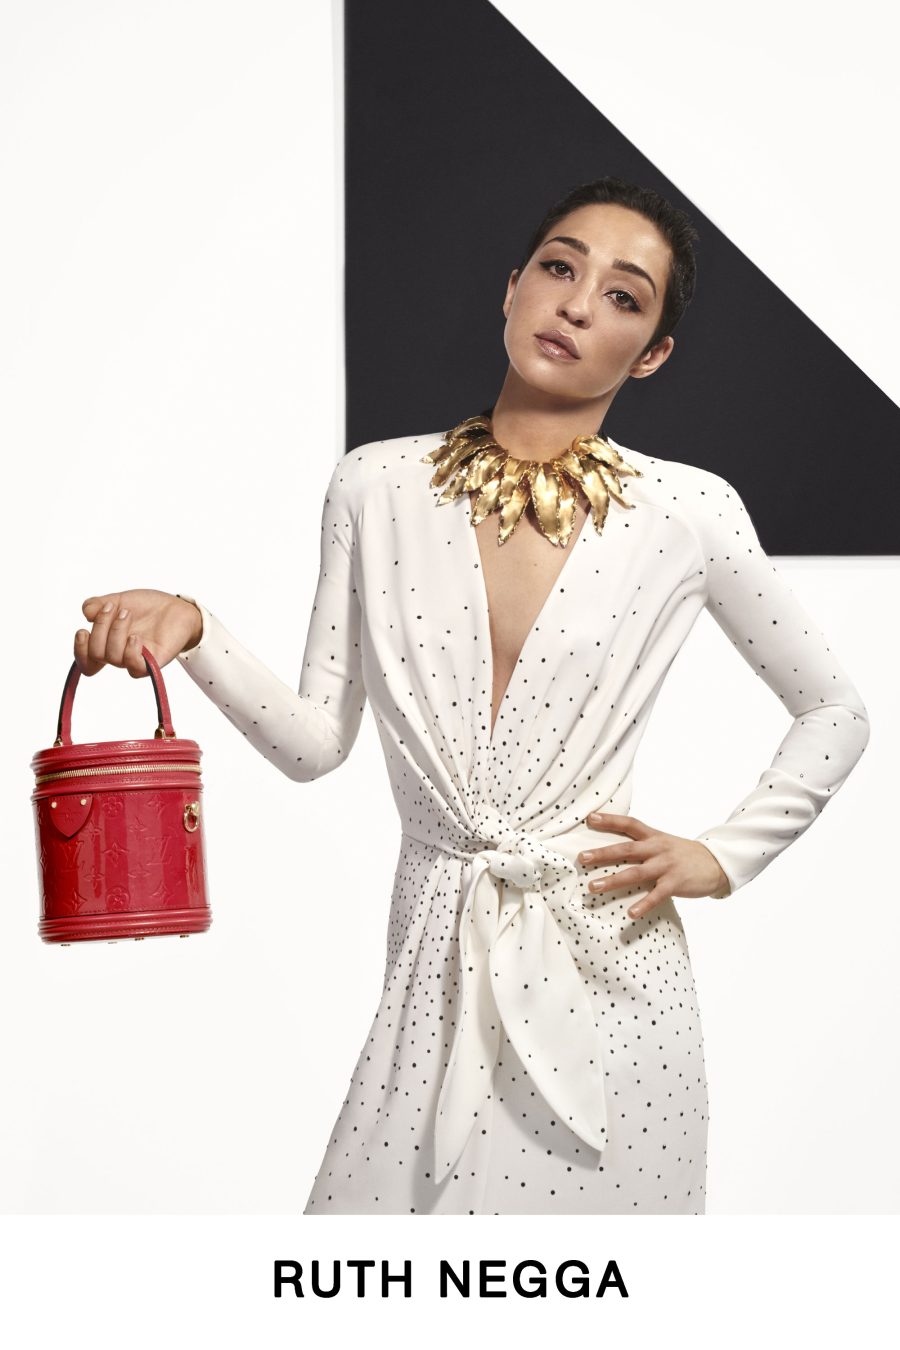 Louis Vuitton's Latest Campaign Features Every Celeb Ever